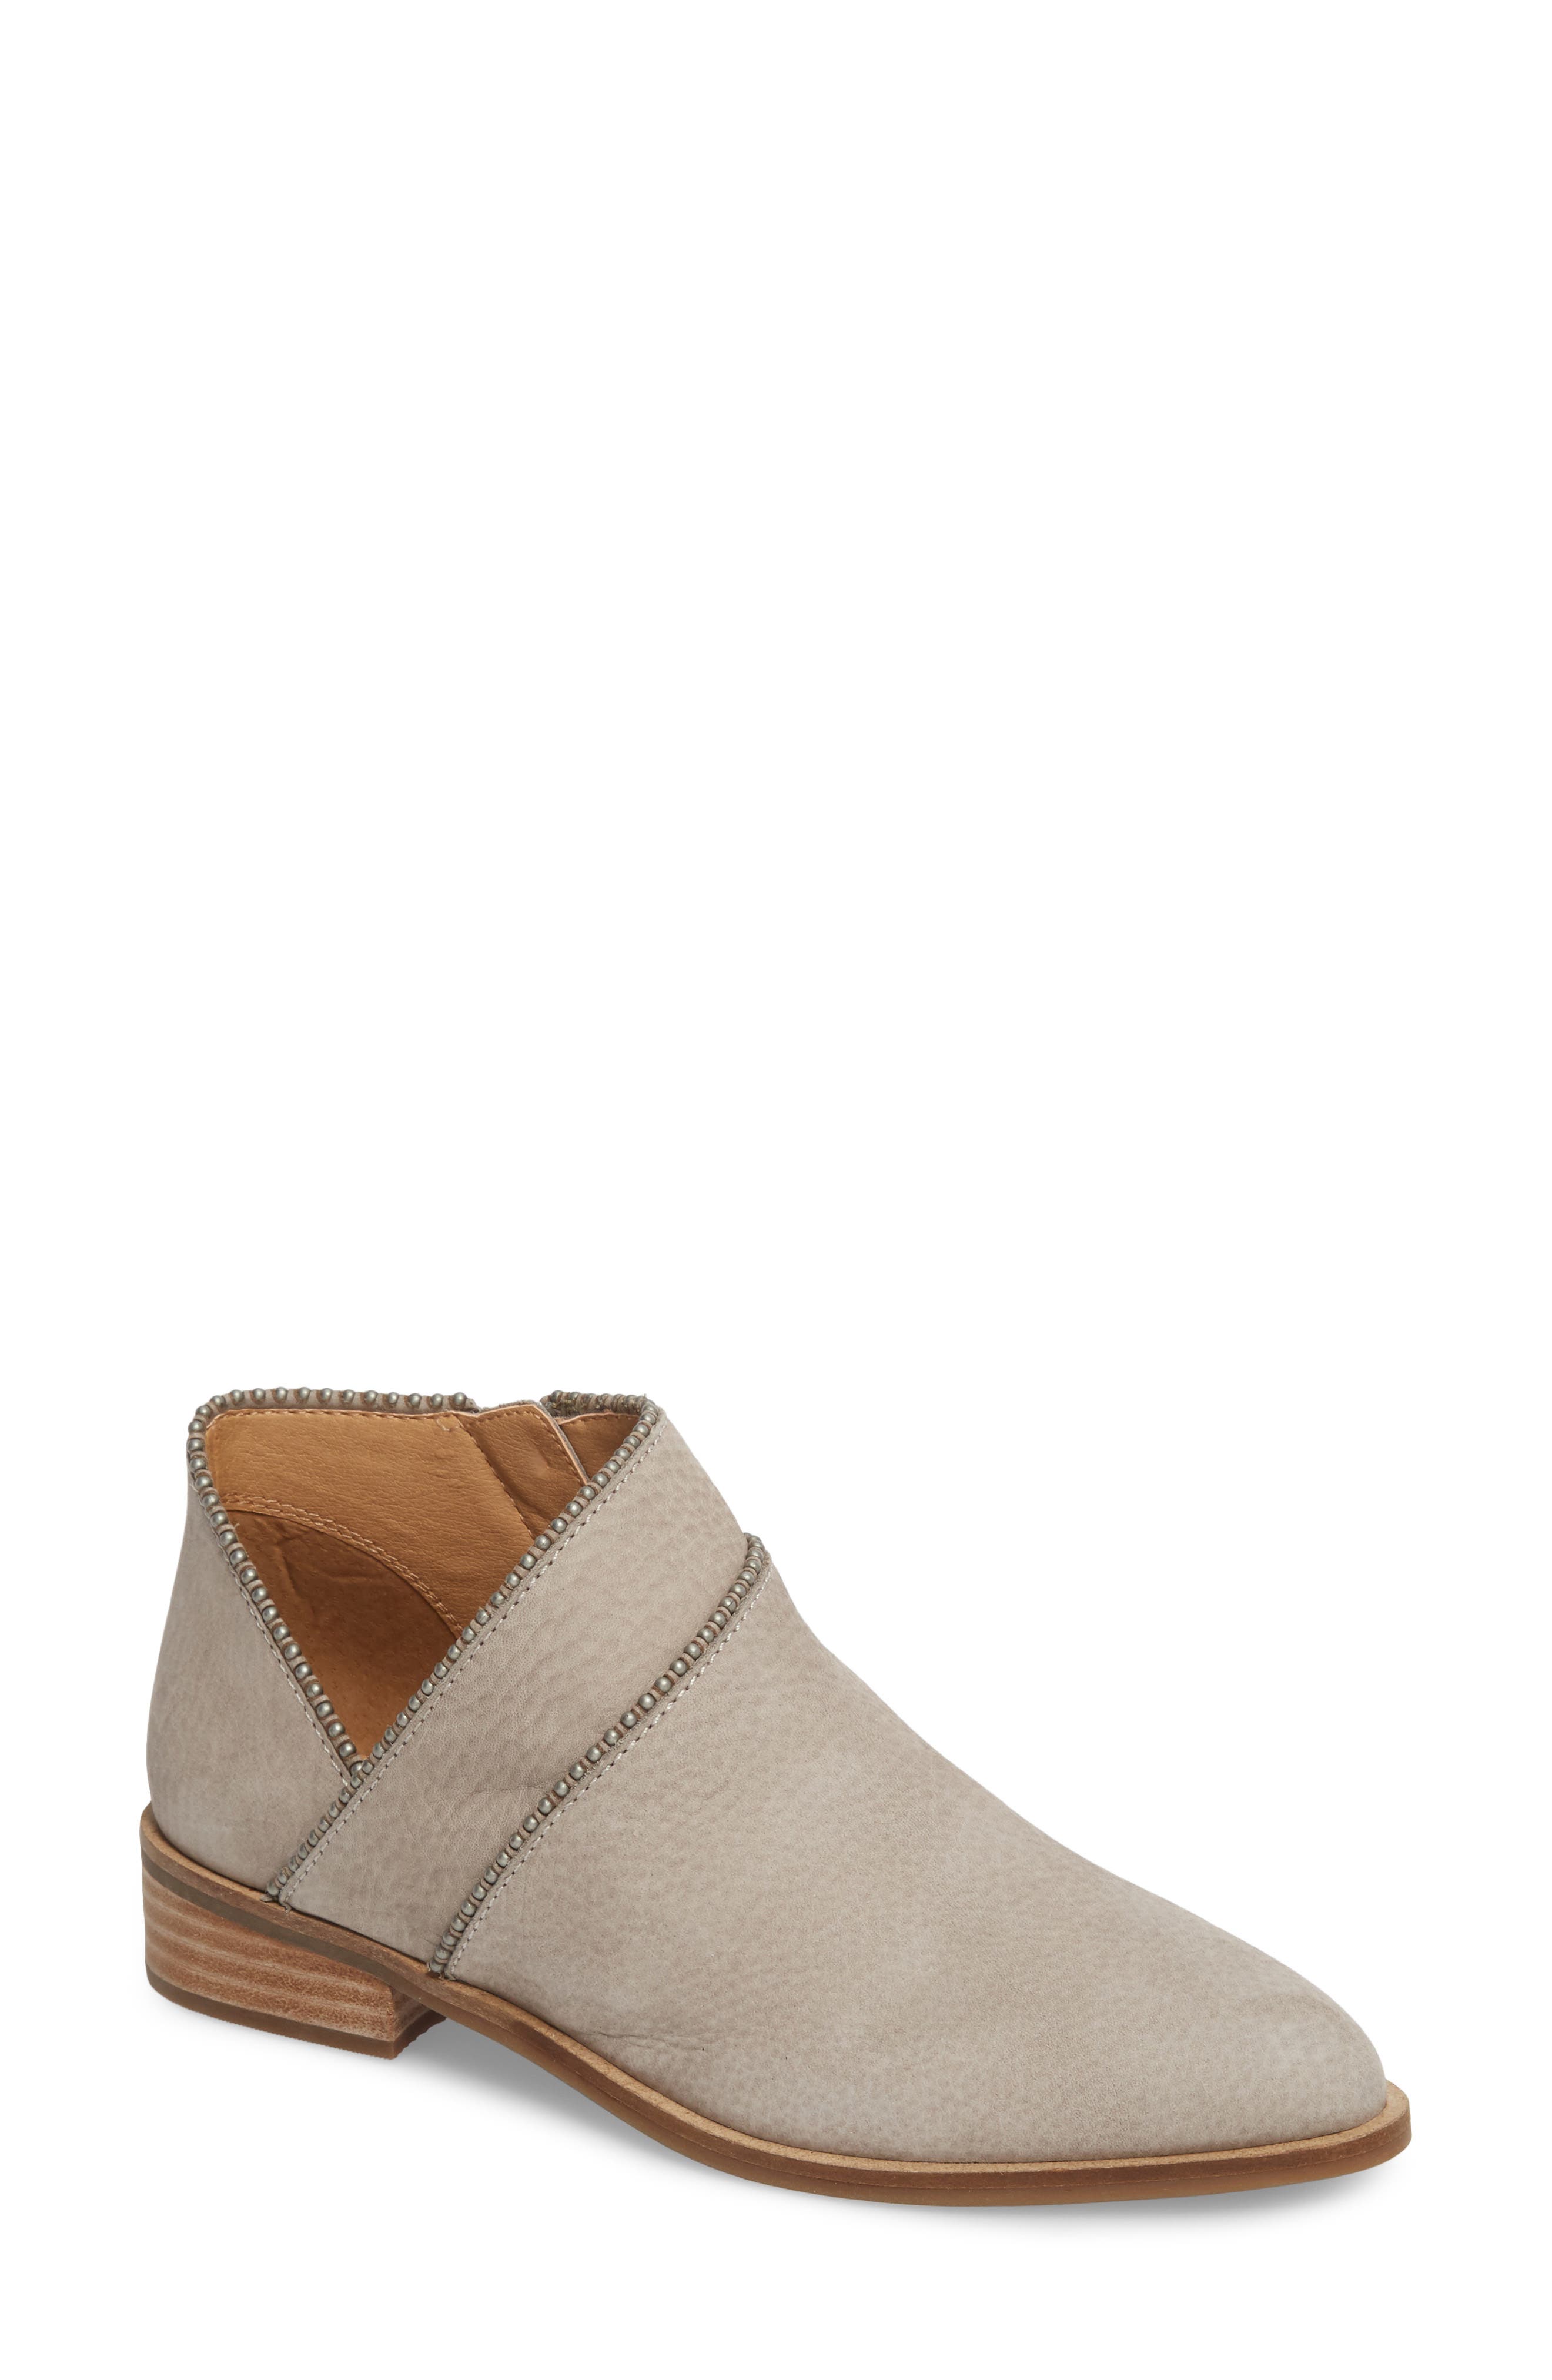 perrma bootie lucky brand